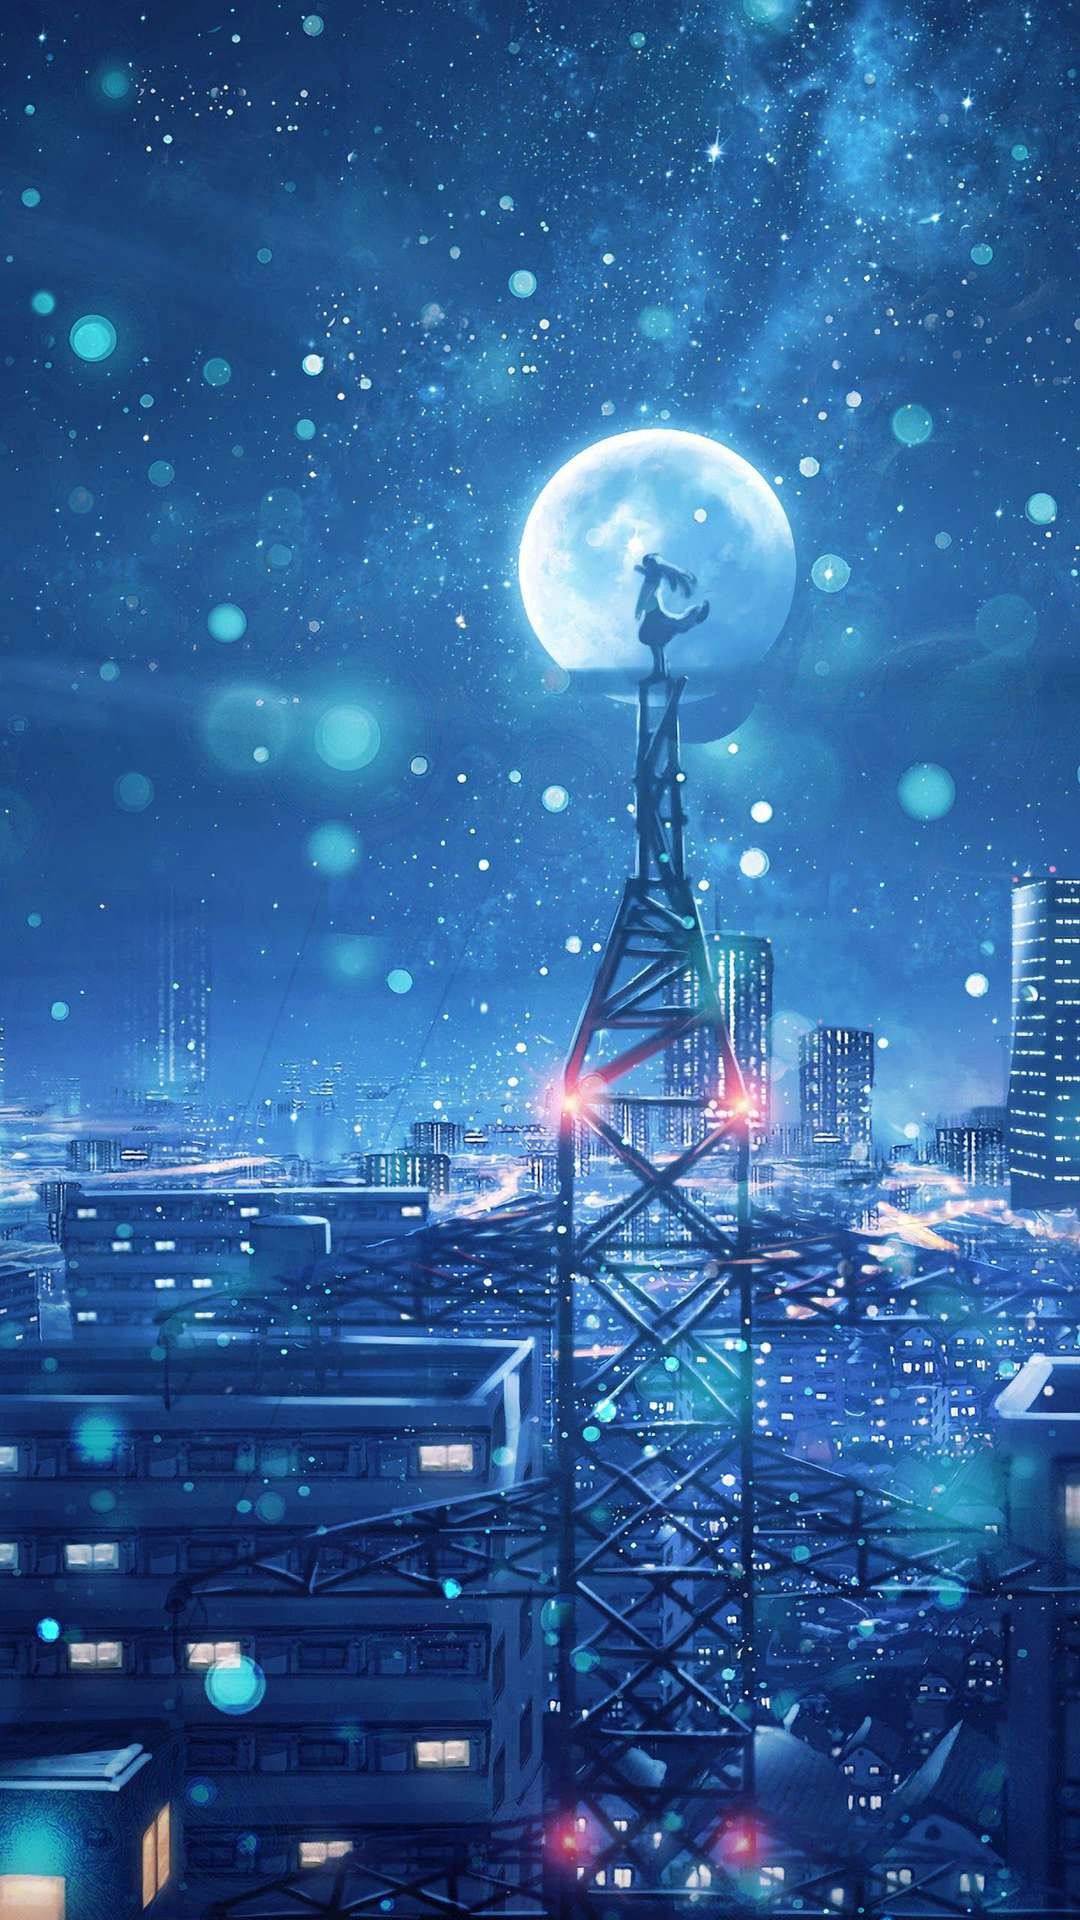 Anime night sky scenery Wallpapers Download | MobCup